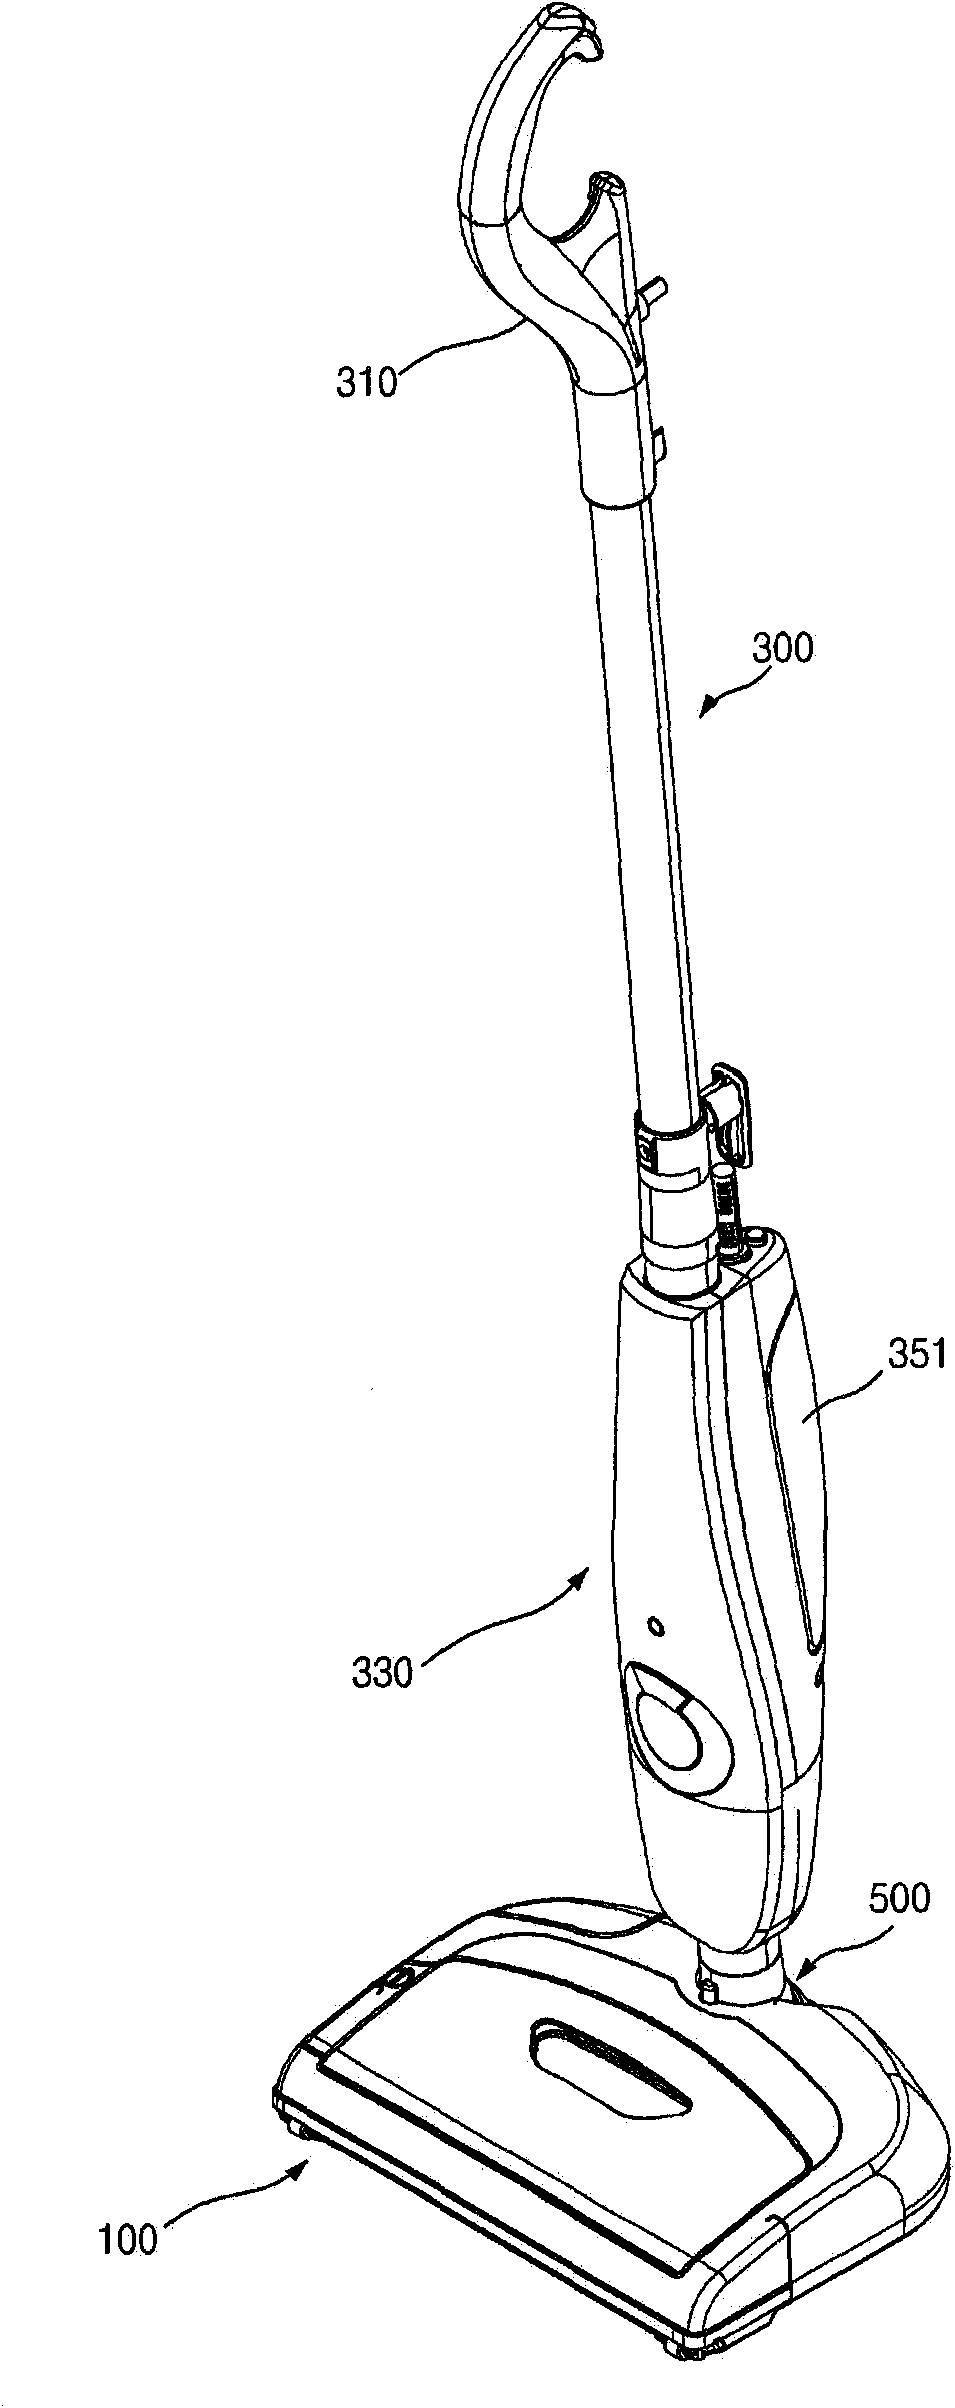 Rotary brush for floor cleaner and base assembly of floor cleaner using the rotary brush